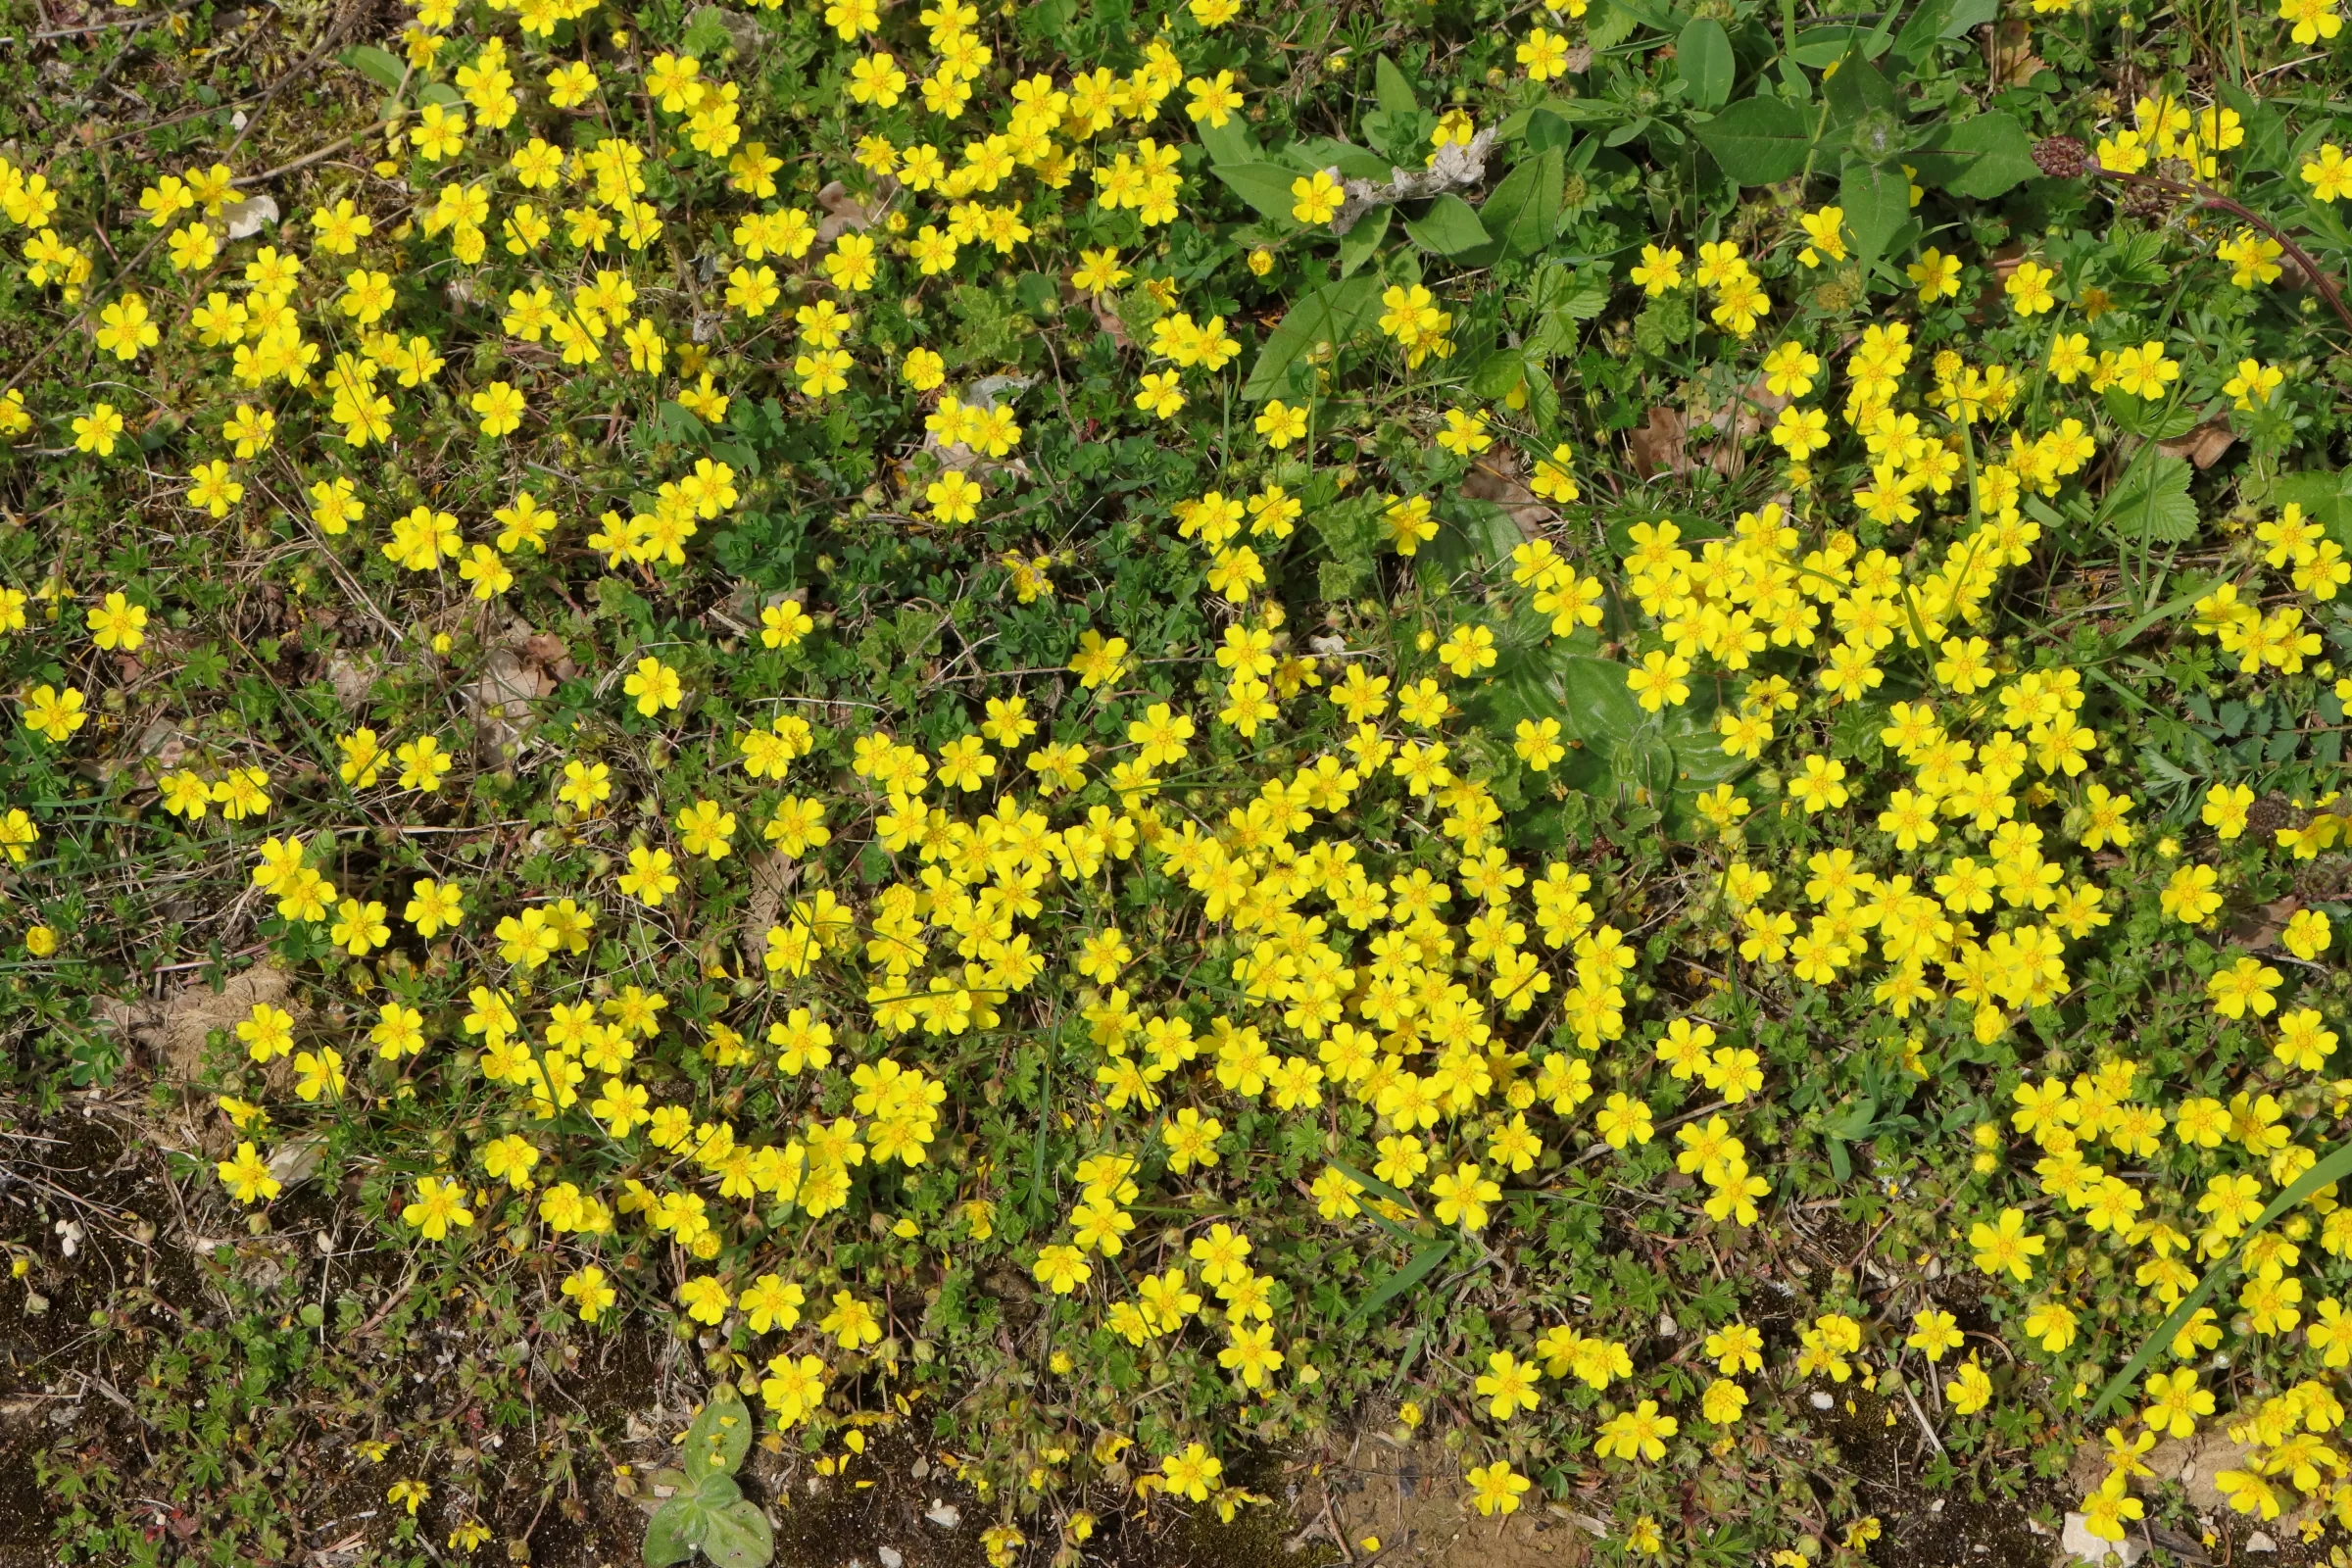 A larger group of spring cinquefoil - the yellow flowers stand out clearly against the green of the leaves.